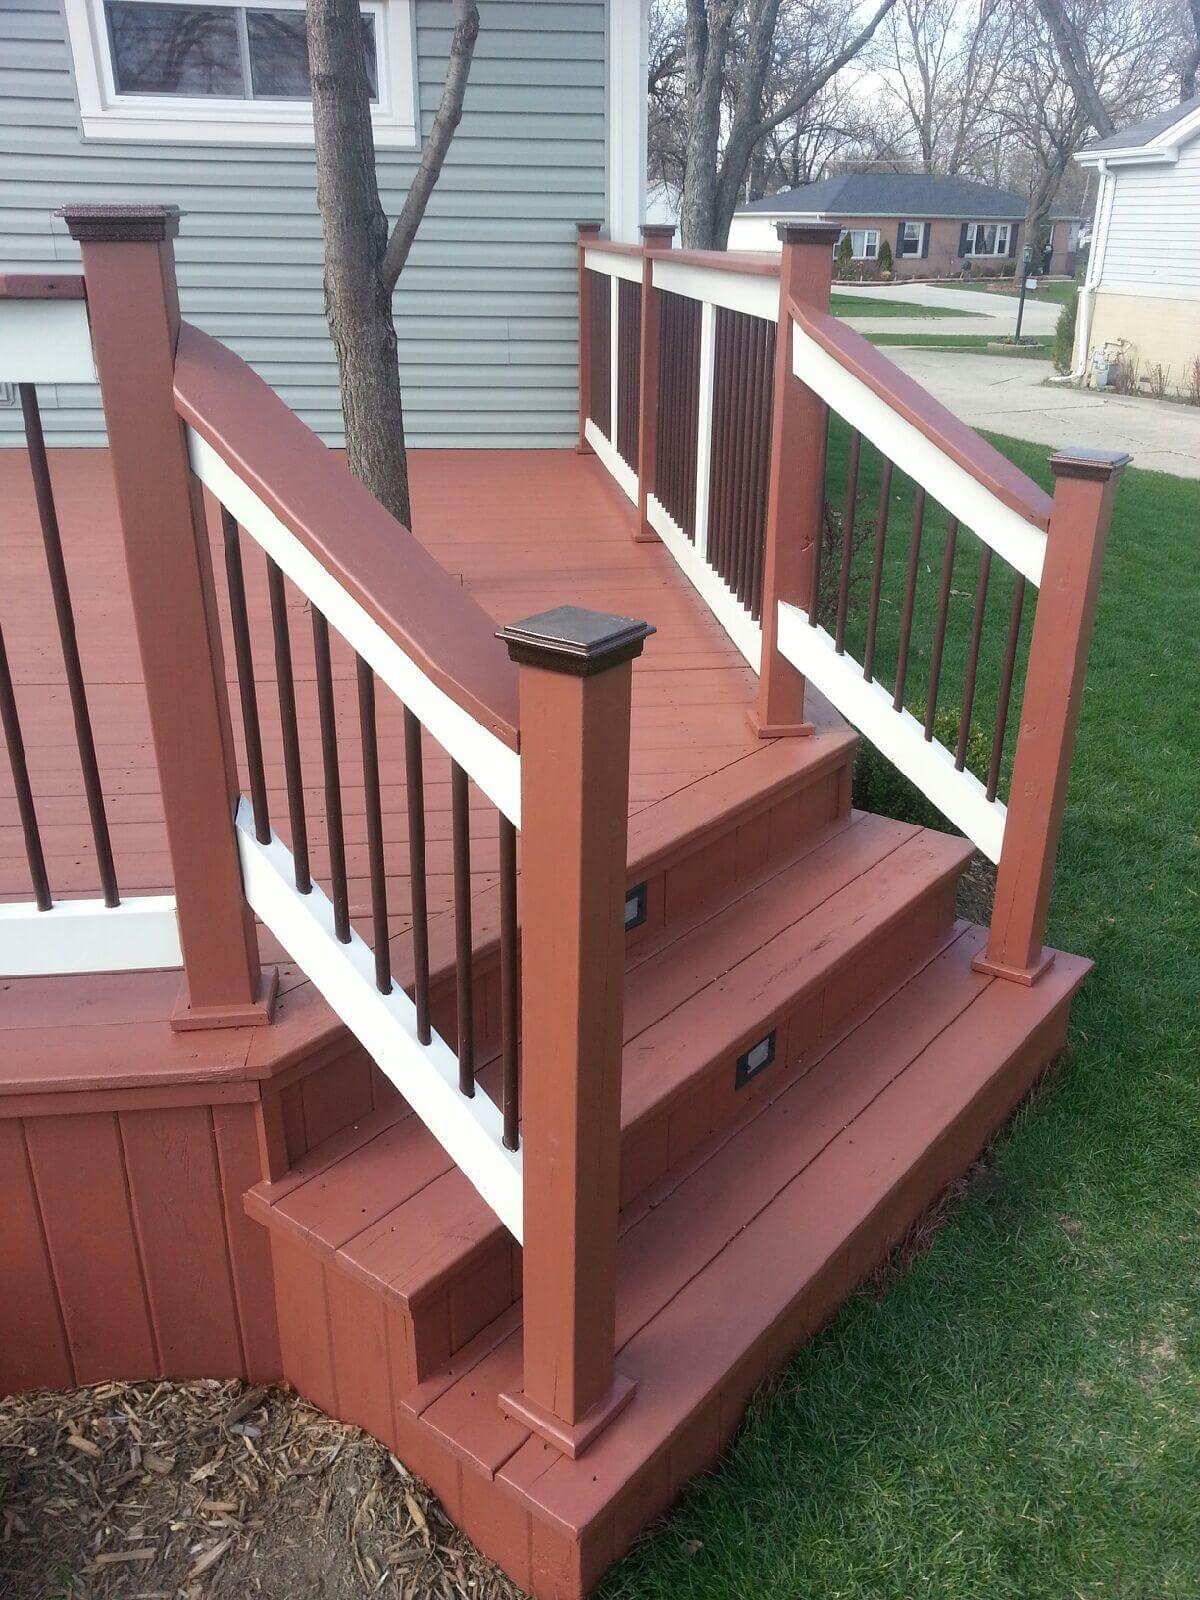 Repairs and maintenance for your deck, fence, and exterior wood staining. - Deck Staining Mount Prospect - Deck Cleaning Services